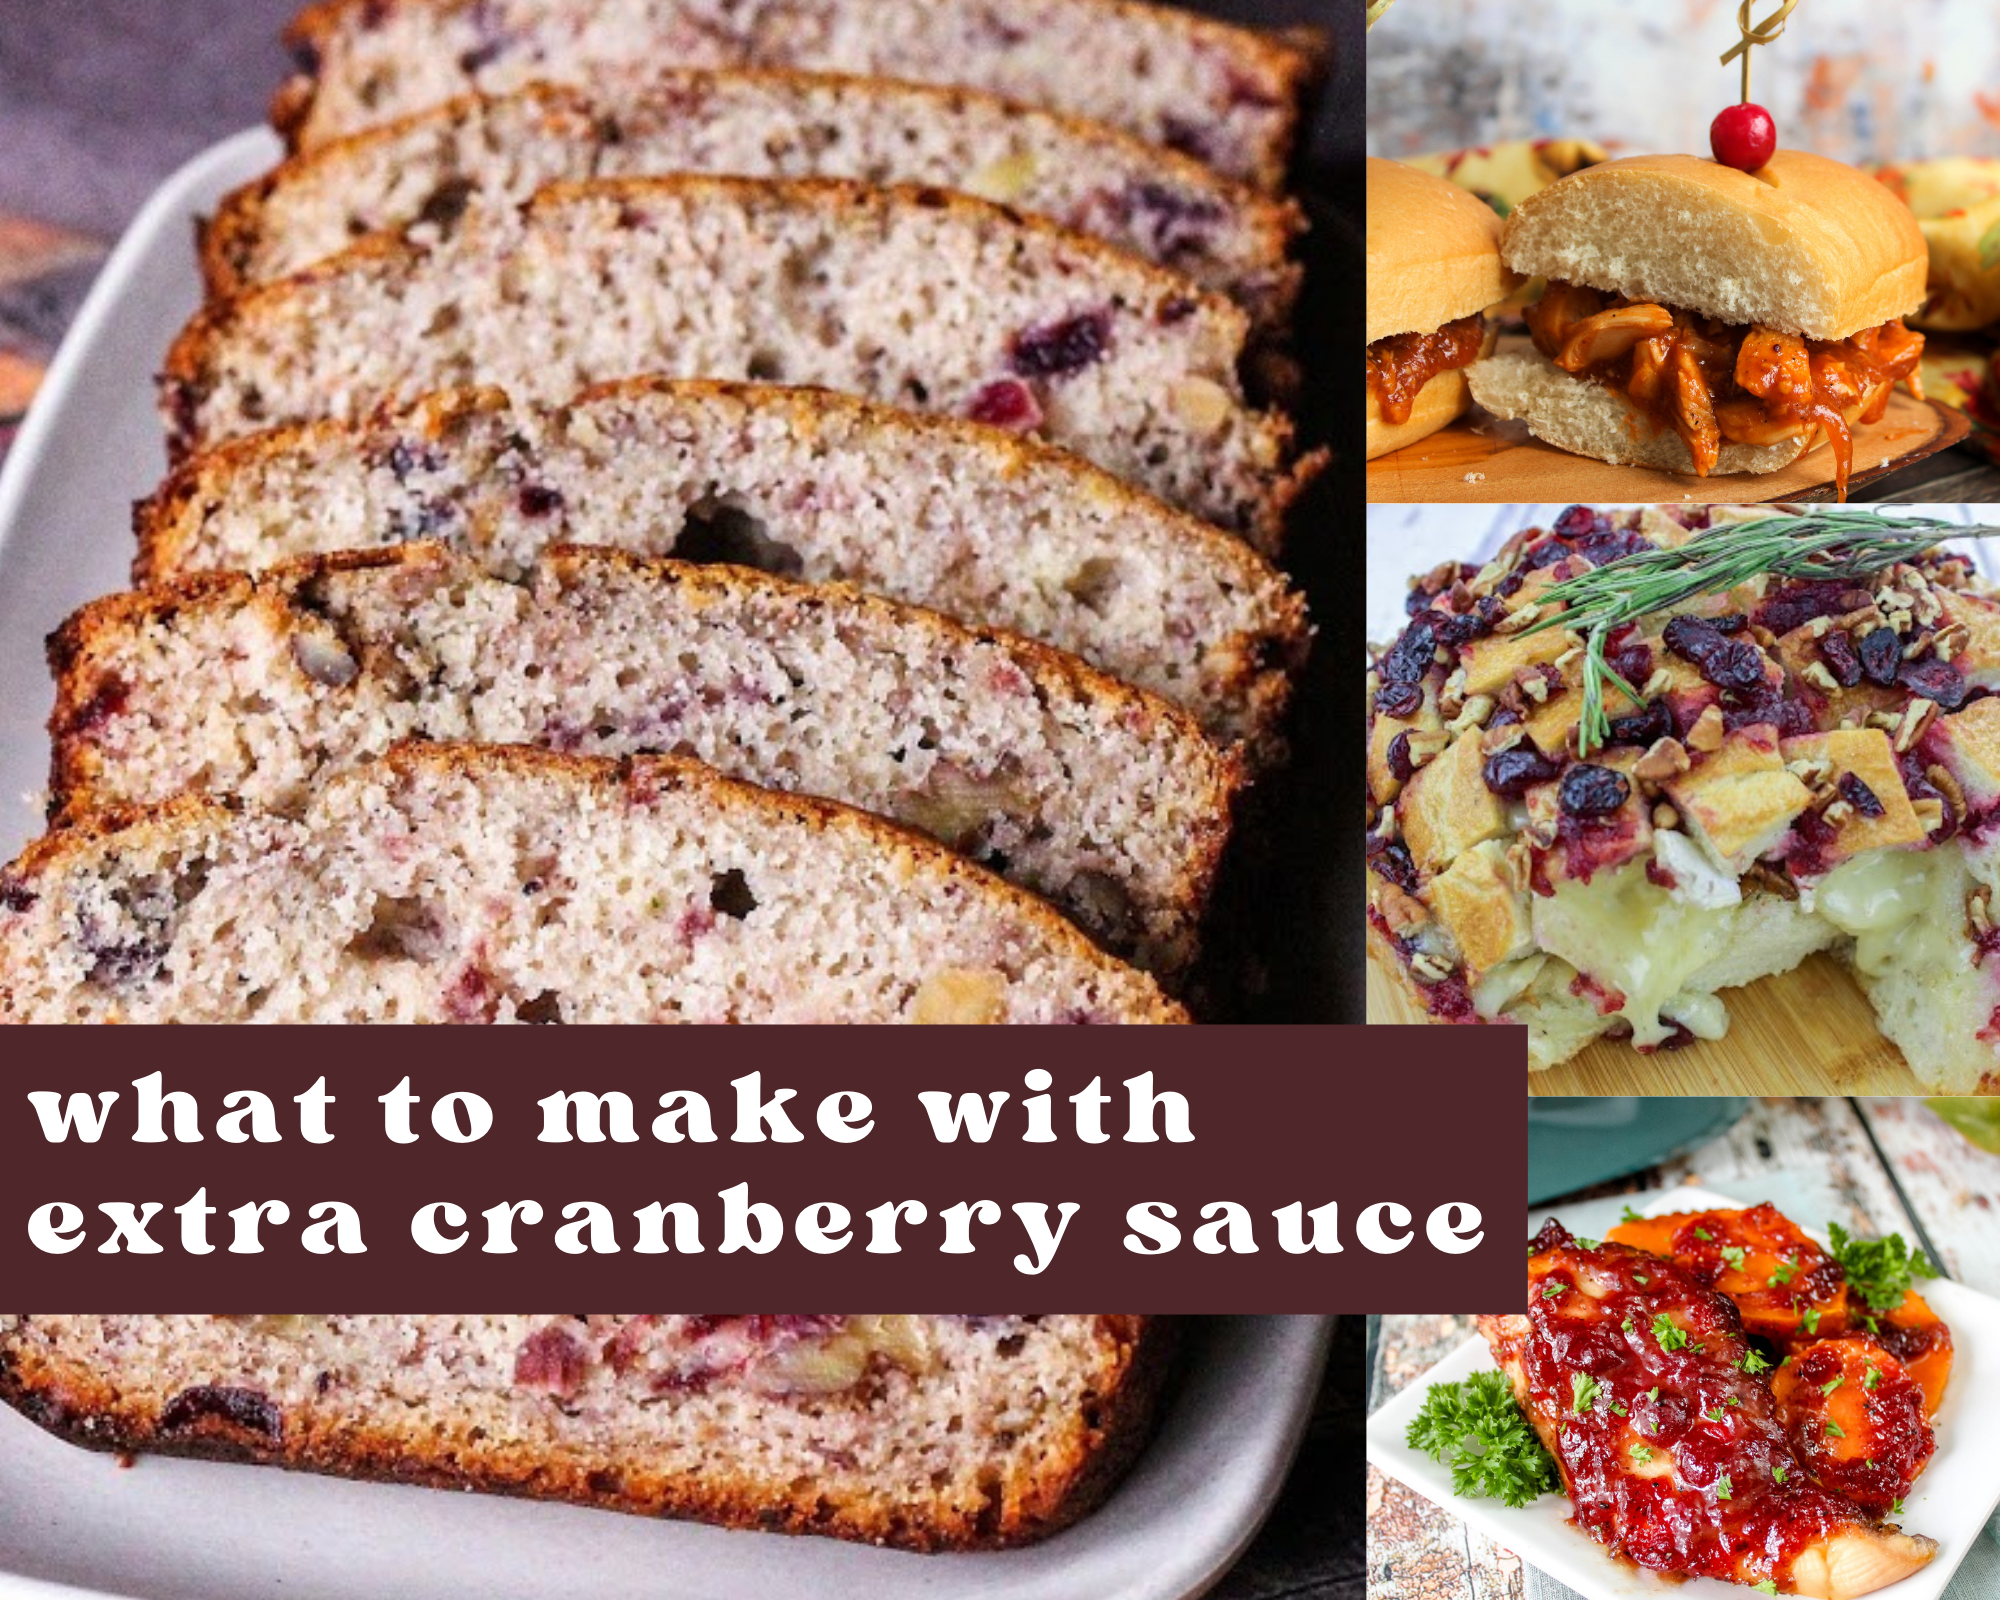 Recipes to make with extra cranberry sauce